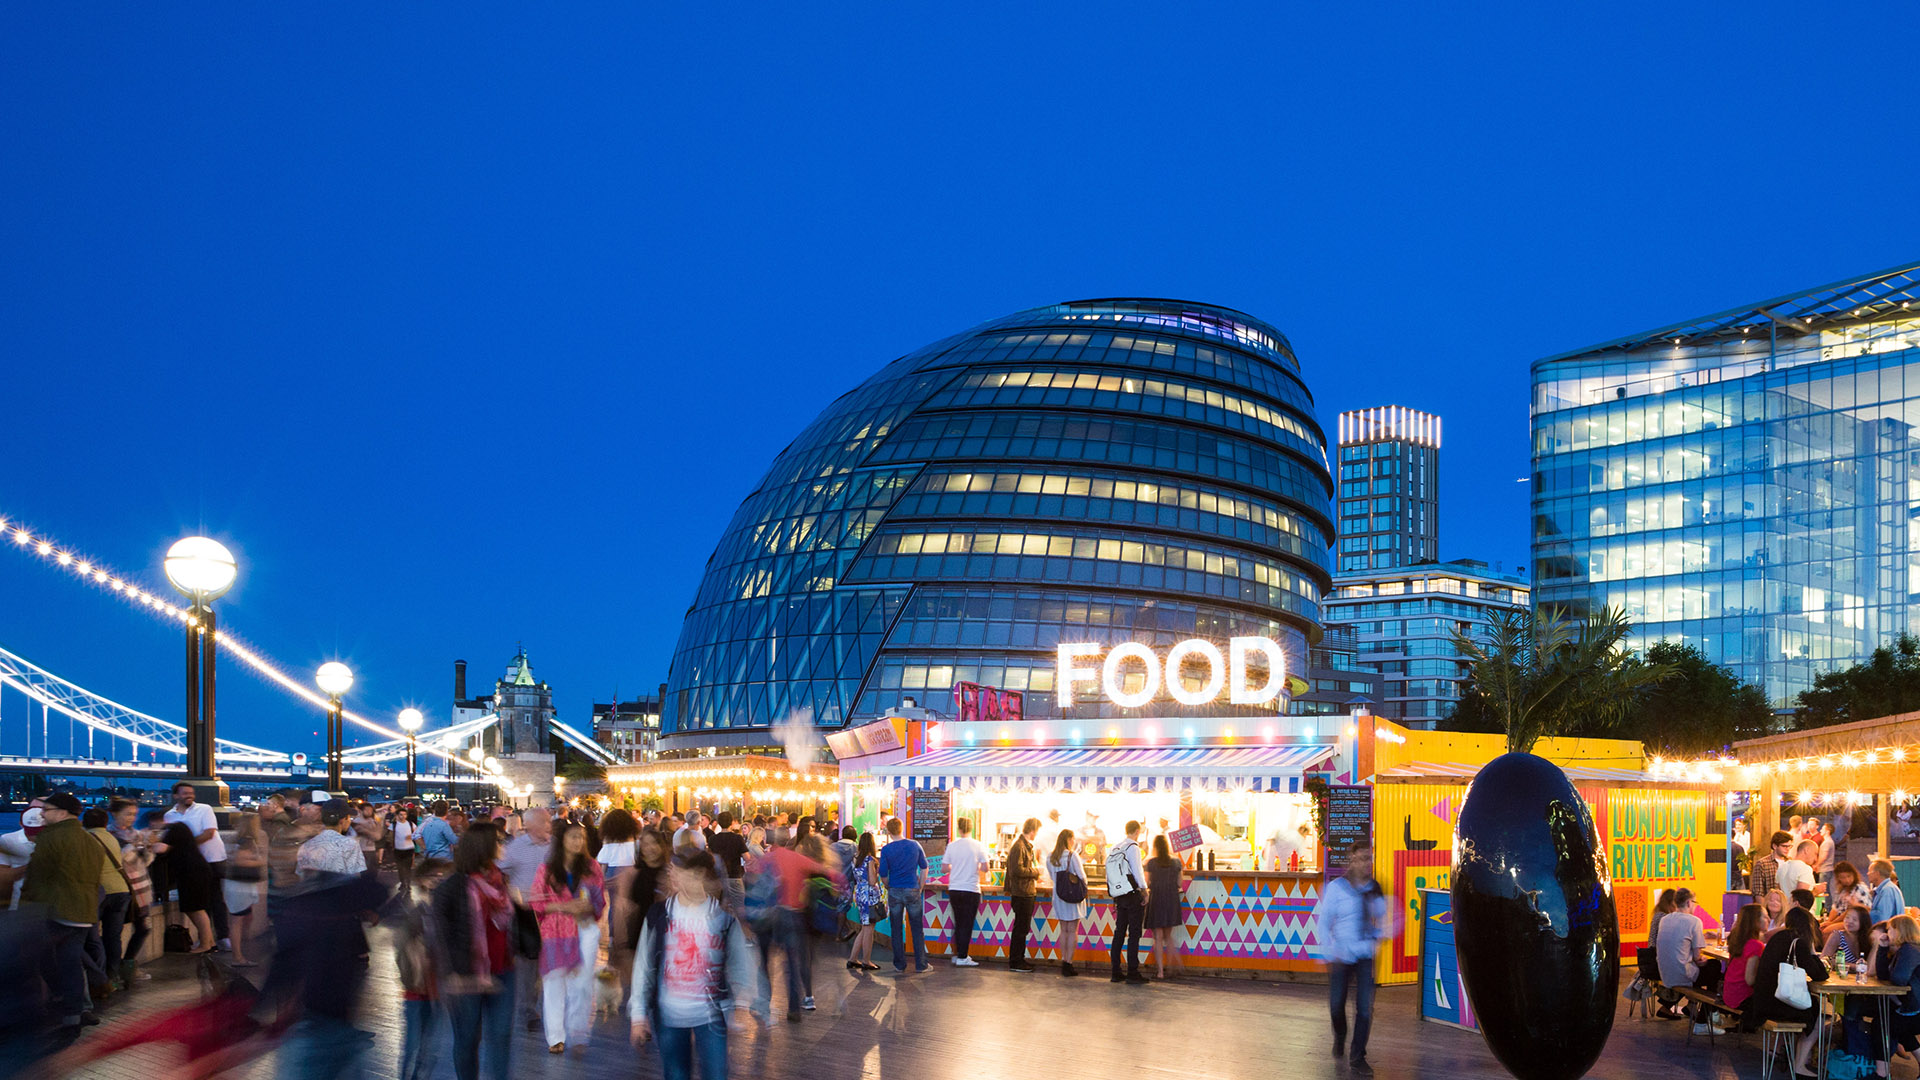 Things to do in London – events, sightseeing - visitlondon.com